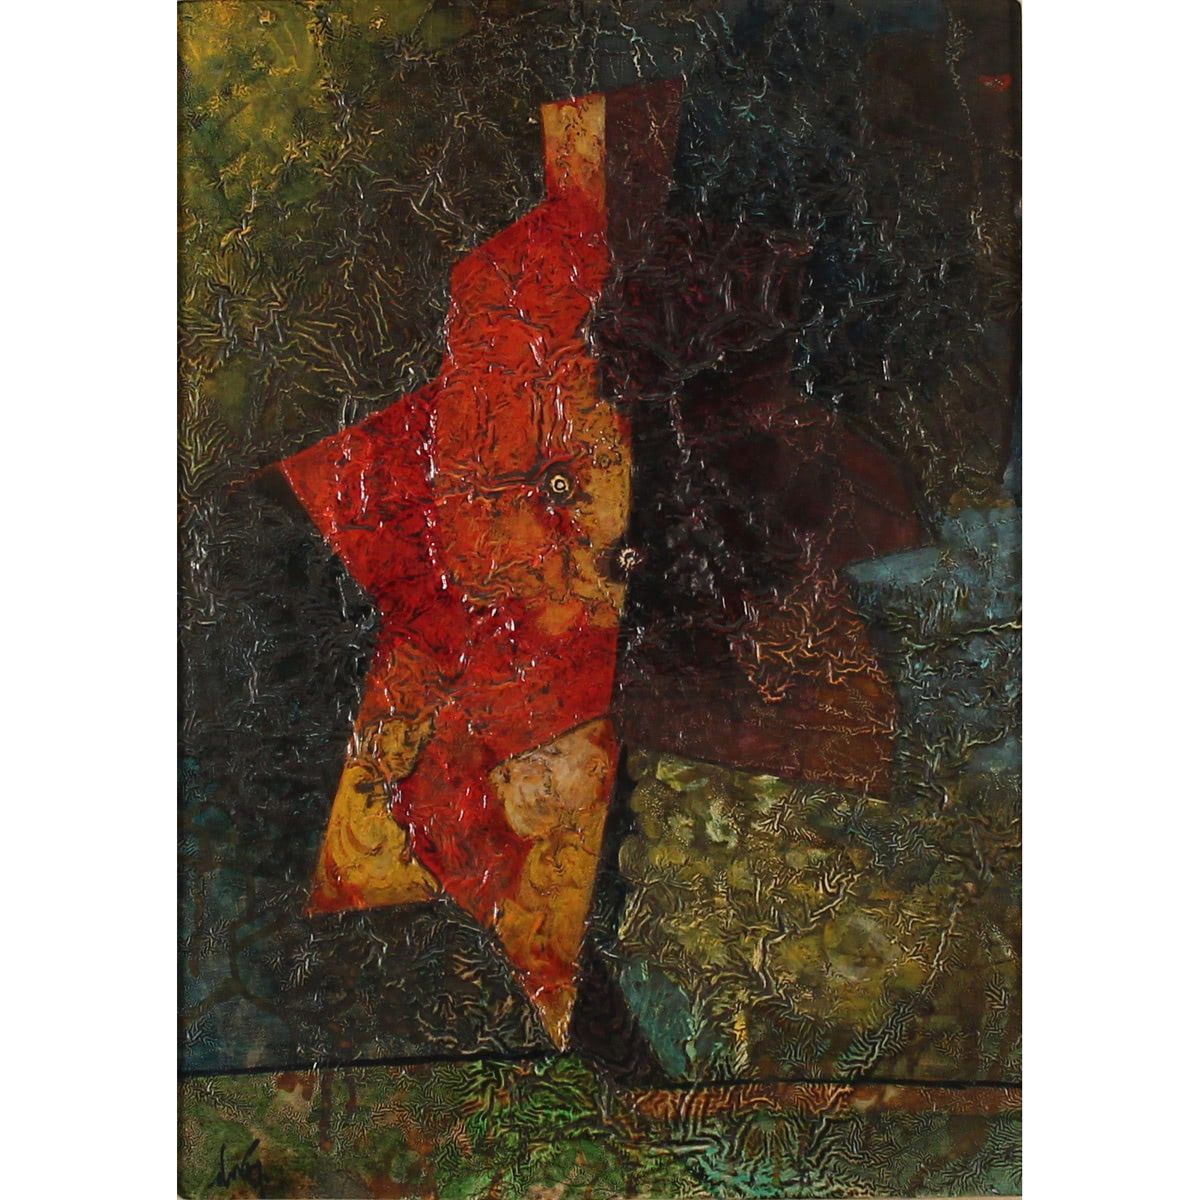 ASTRATTO-ABSTRACT Oil painting on canvas in frame. Signed Dova. Cm 46x33
Oil pai&hellip;